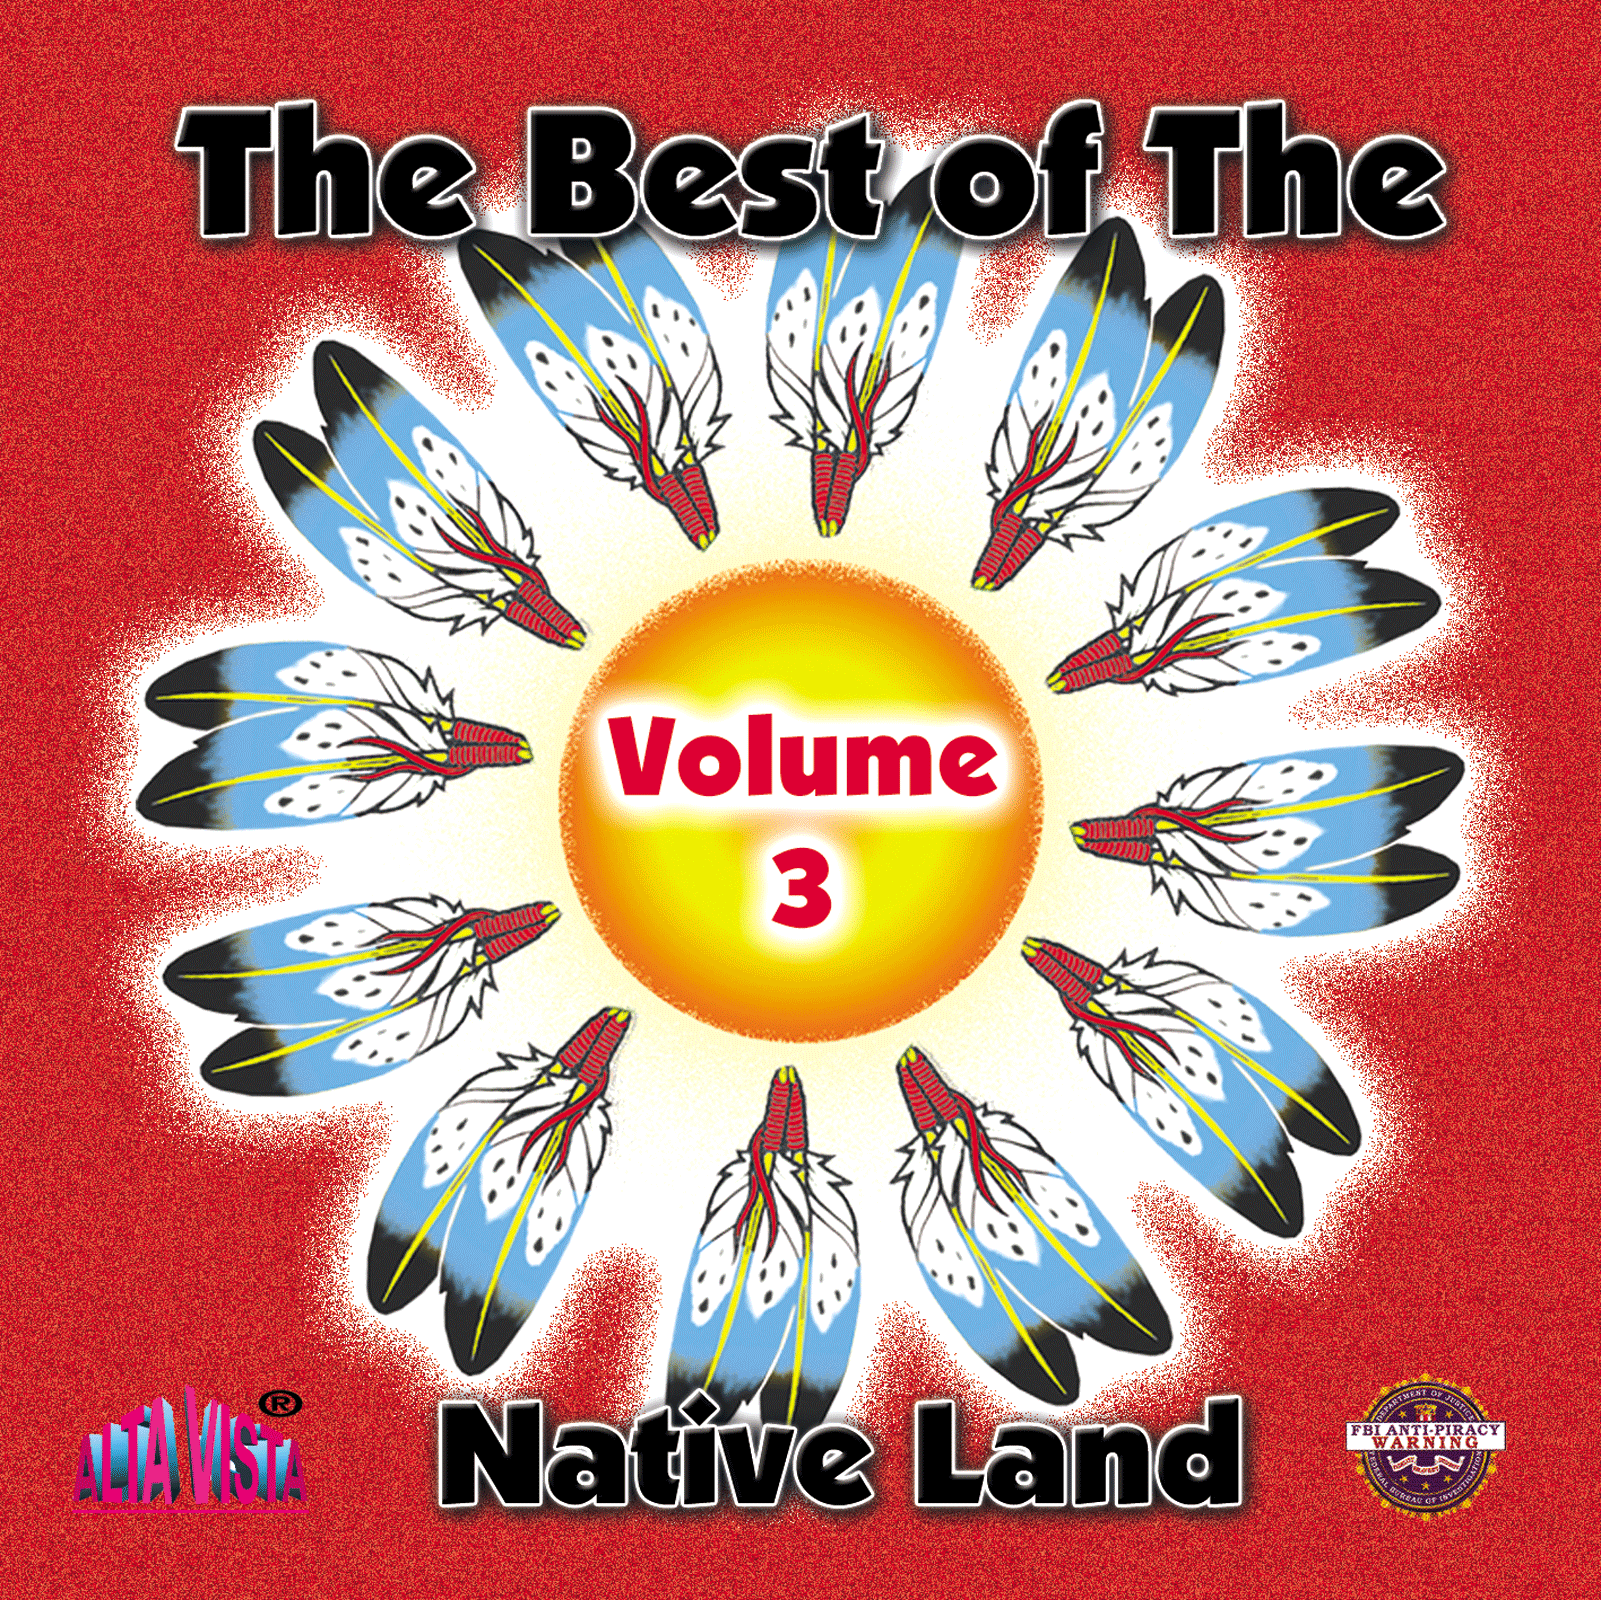 Best of The Native Land Vol 3